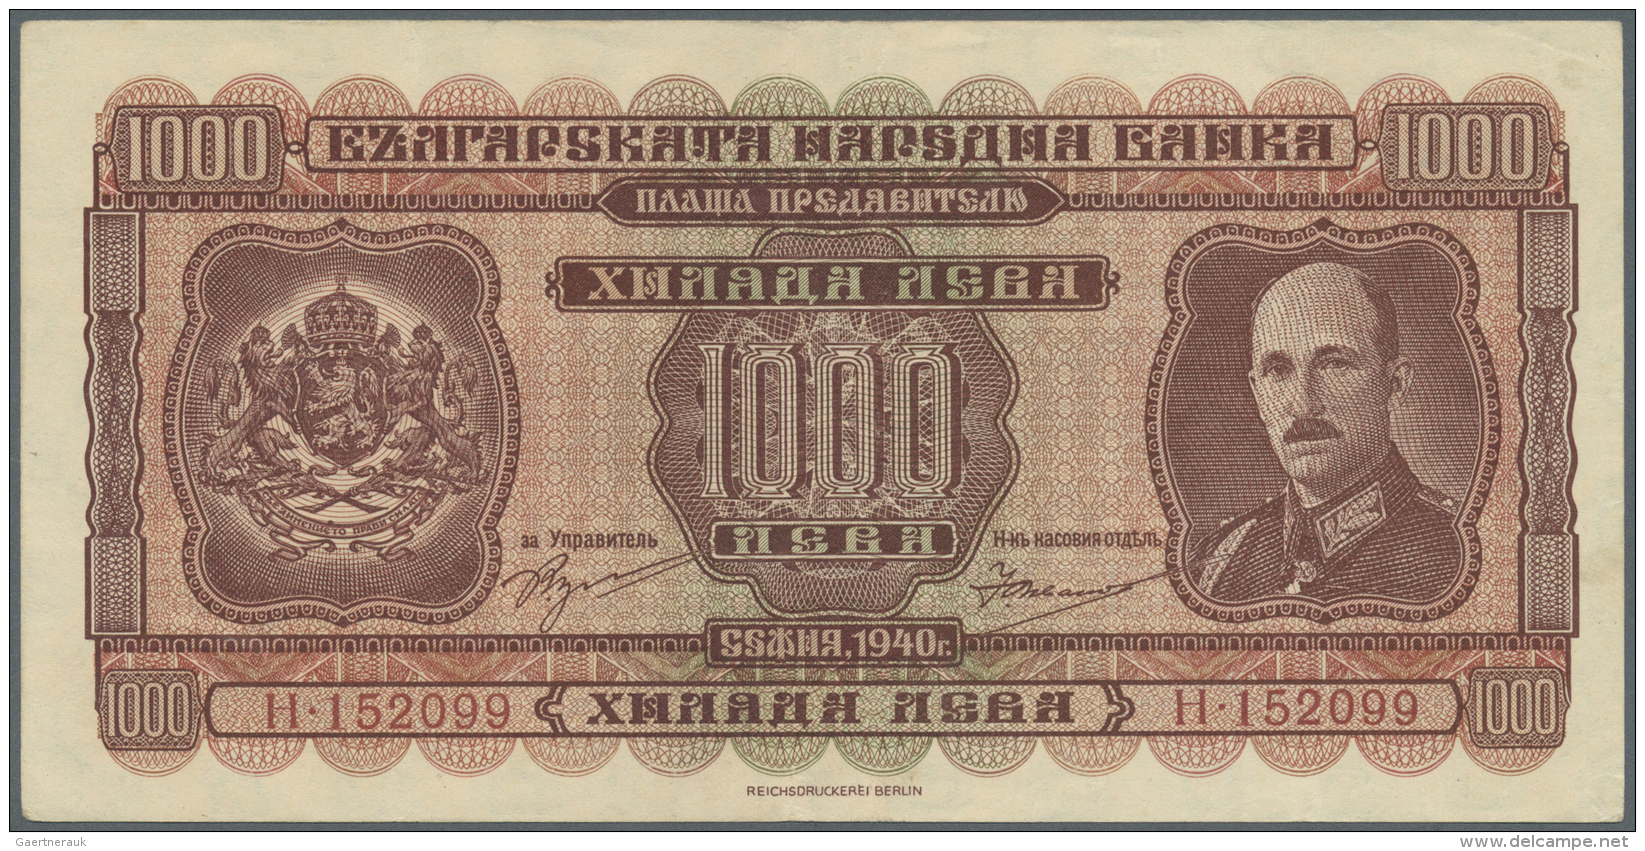 Bulgaria / Bulgarien: 1000 Leva 1940 Printer Reichsdruckerei Berlin, P.59 In Nice Used Contion With Several Folds And St - Bulgaria